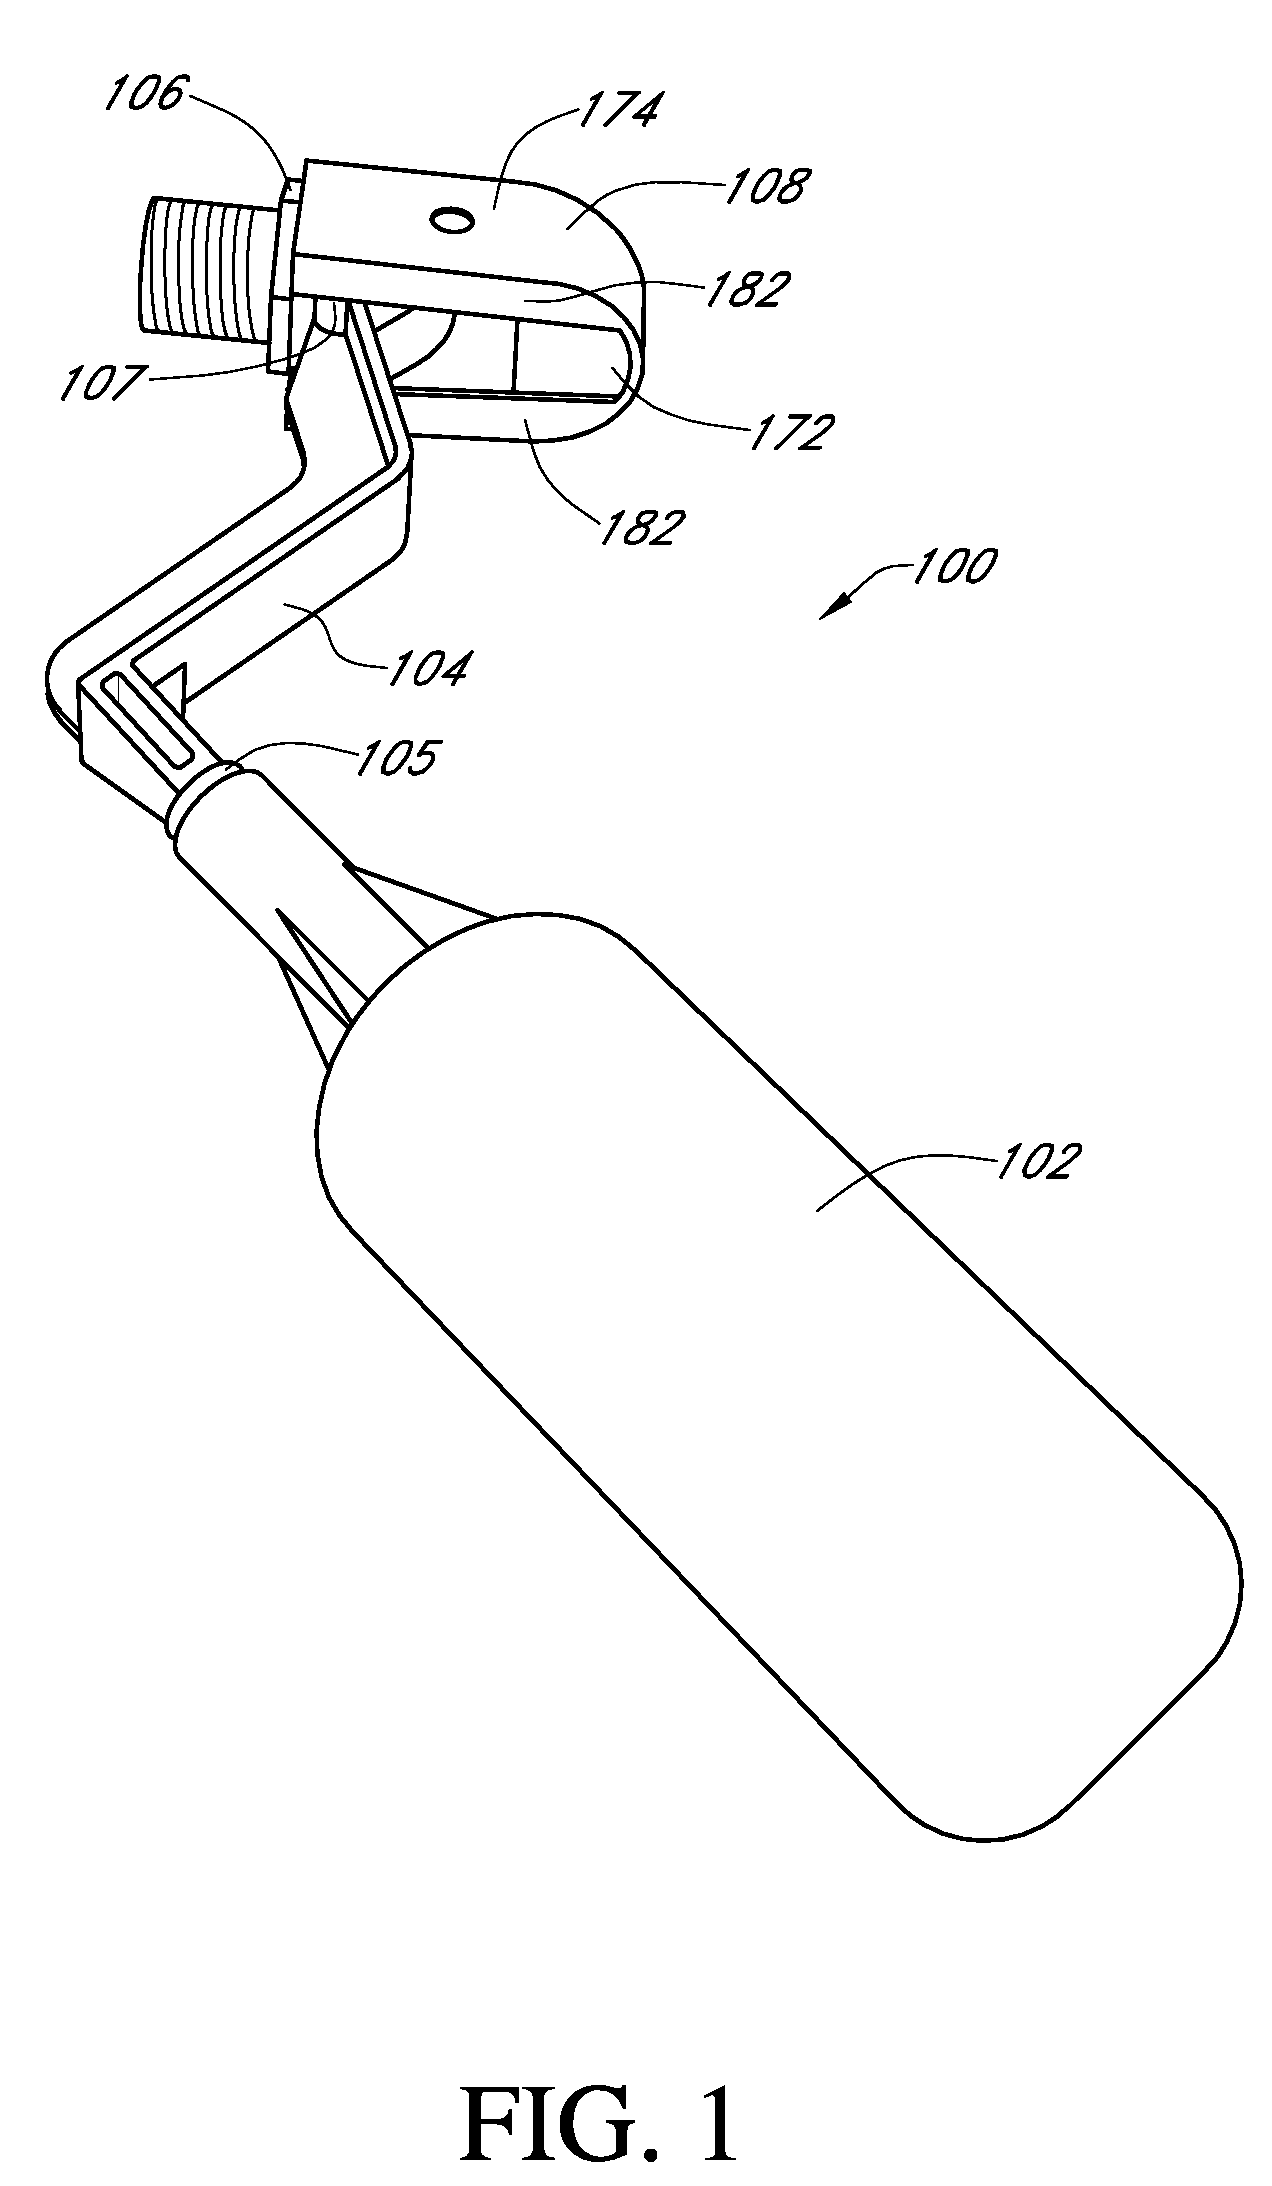 Water valve for animal waterer permitting assembly without tools